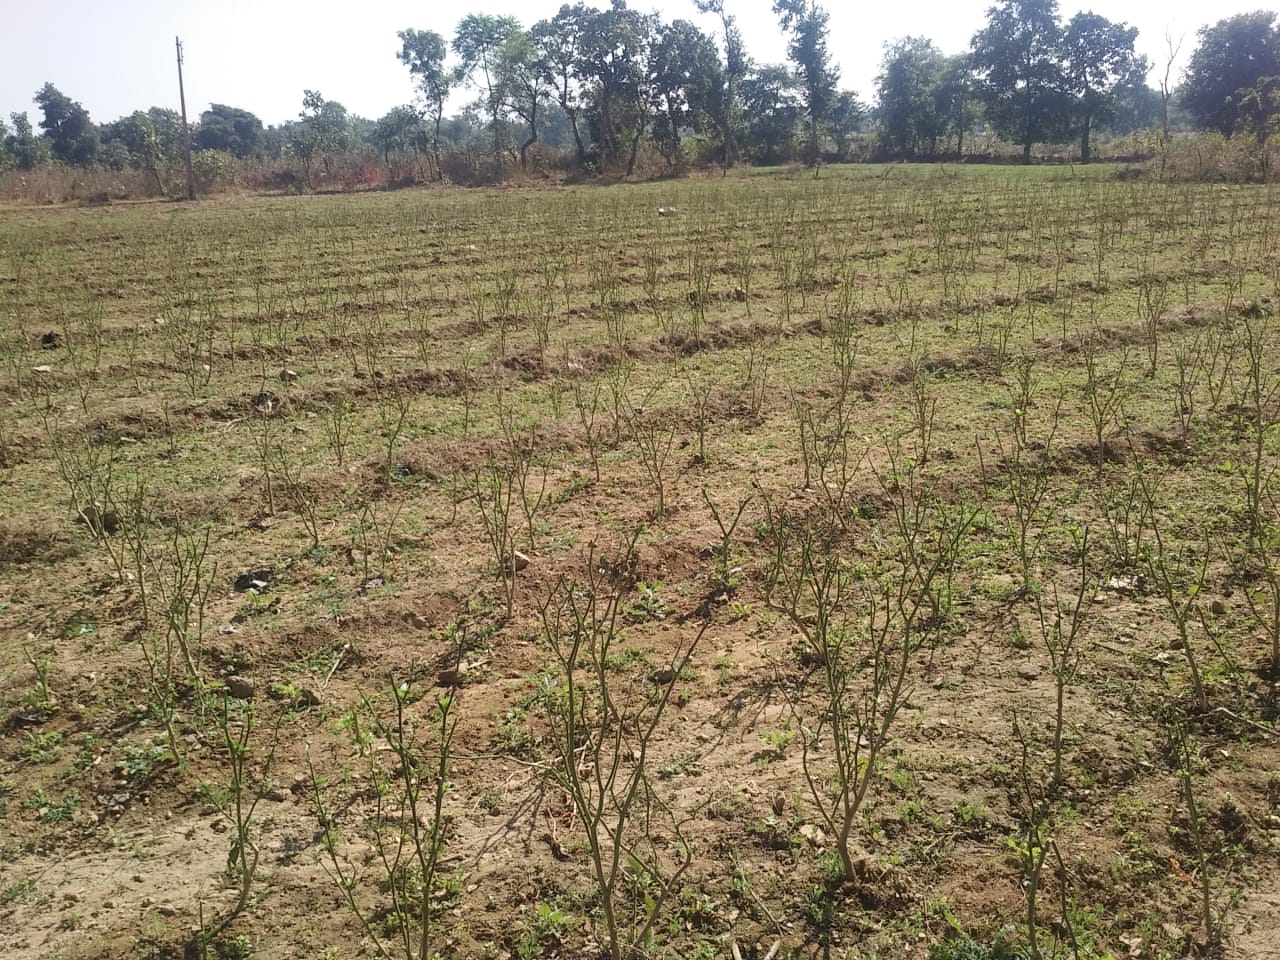  50 acre crop damaged due to terror of stray animals